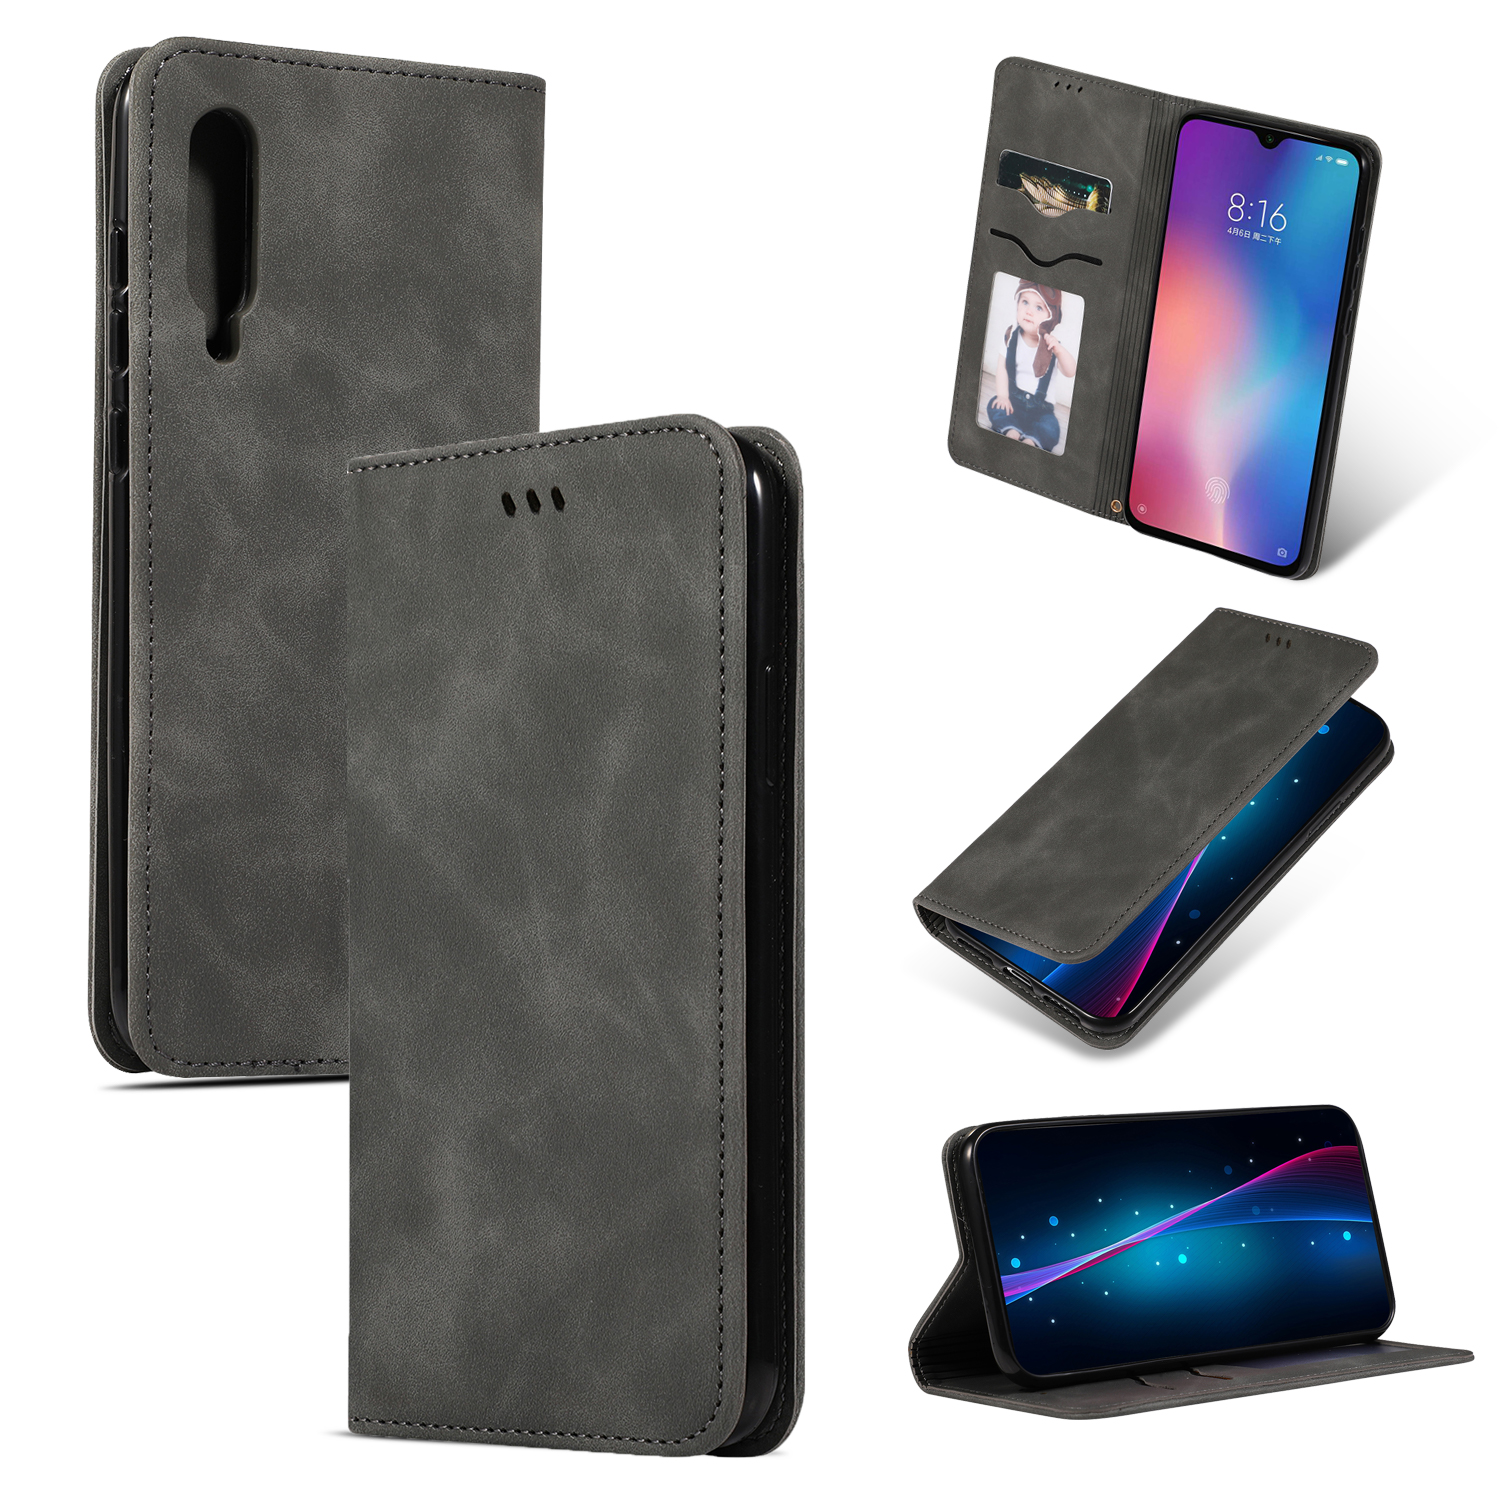 

Bakeey Flip Shockproof Card Slot With Magnetic PU Leather Full Body Protective Case For Xiaomi Mi 9 / Mi 9 Transparent Edition